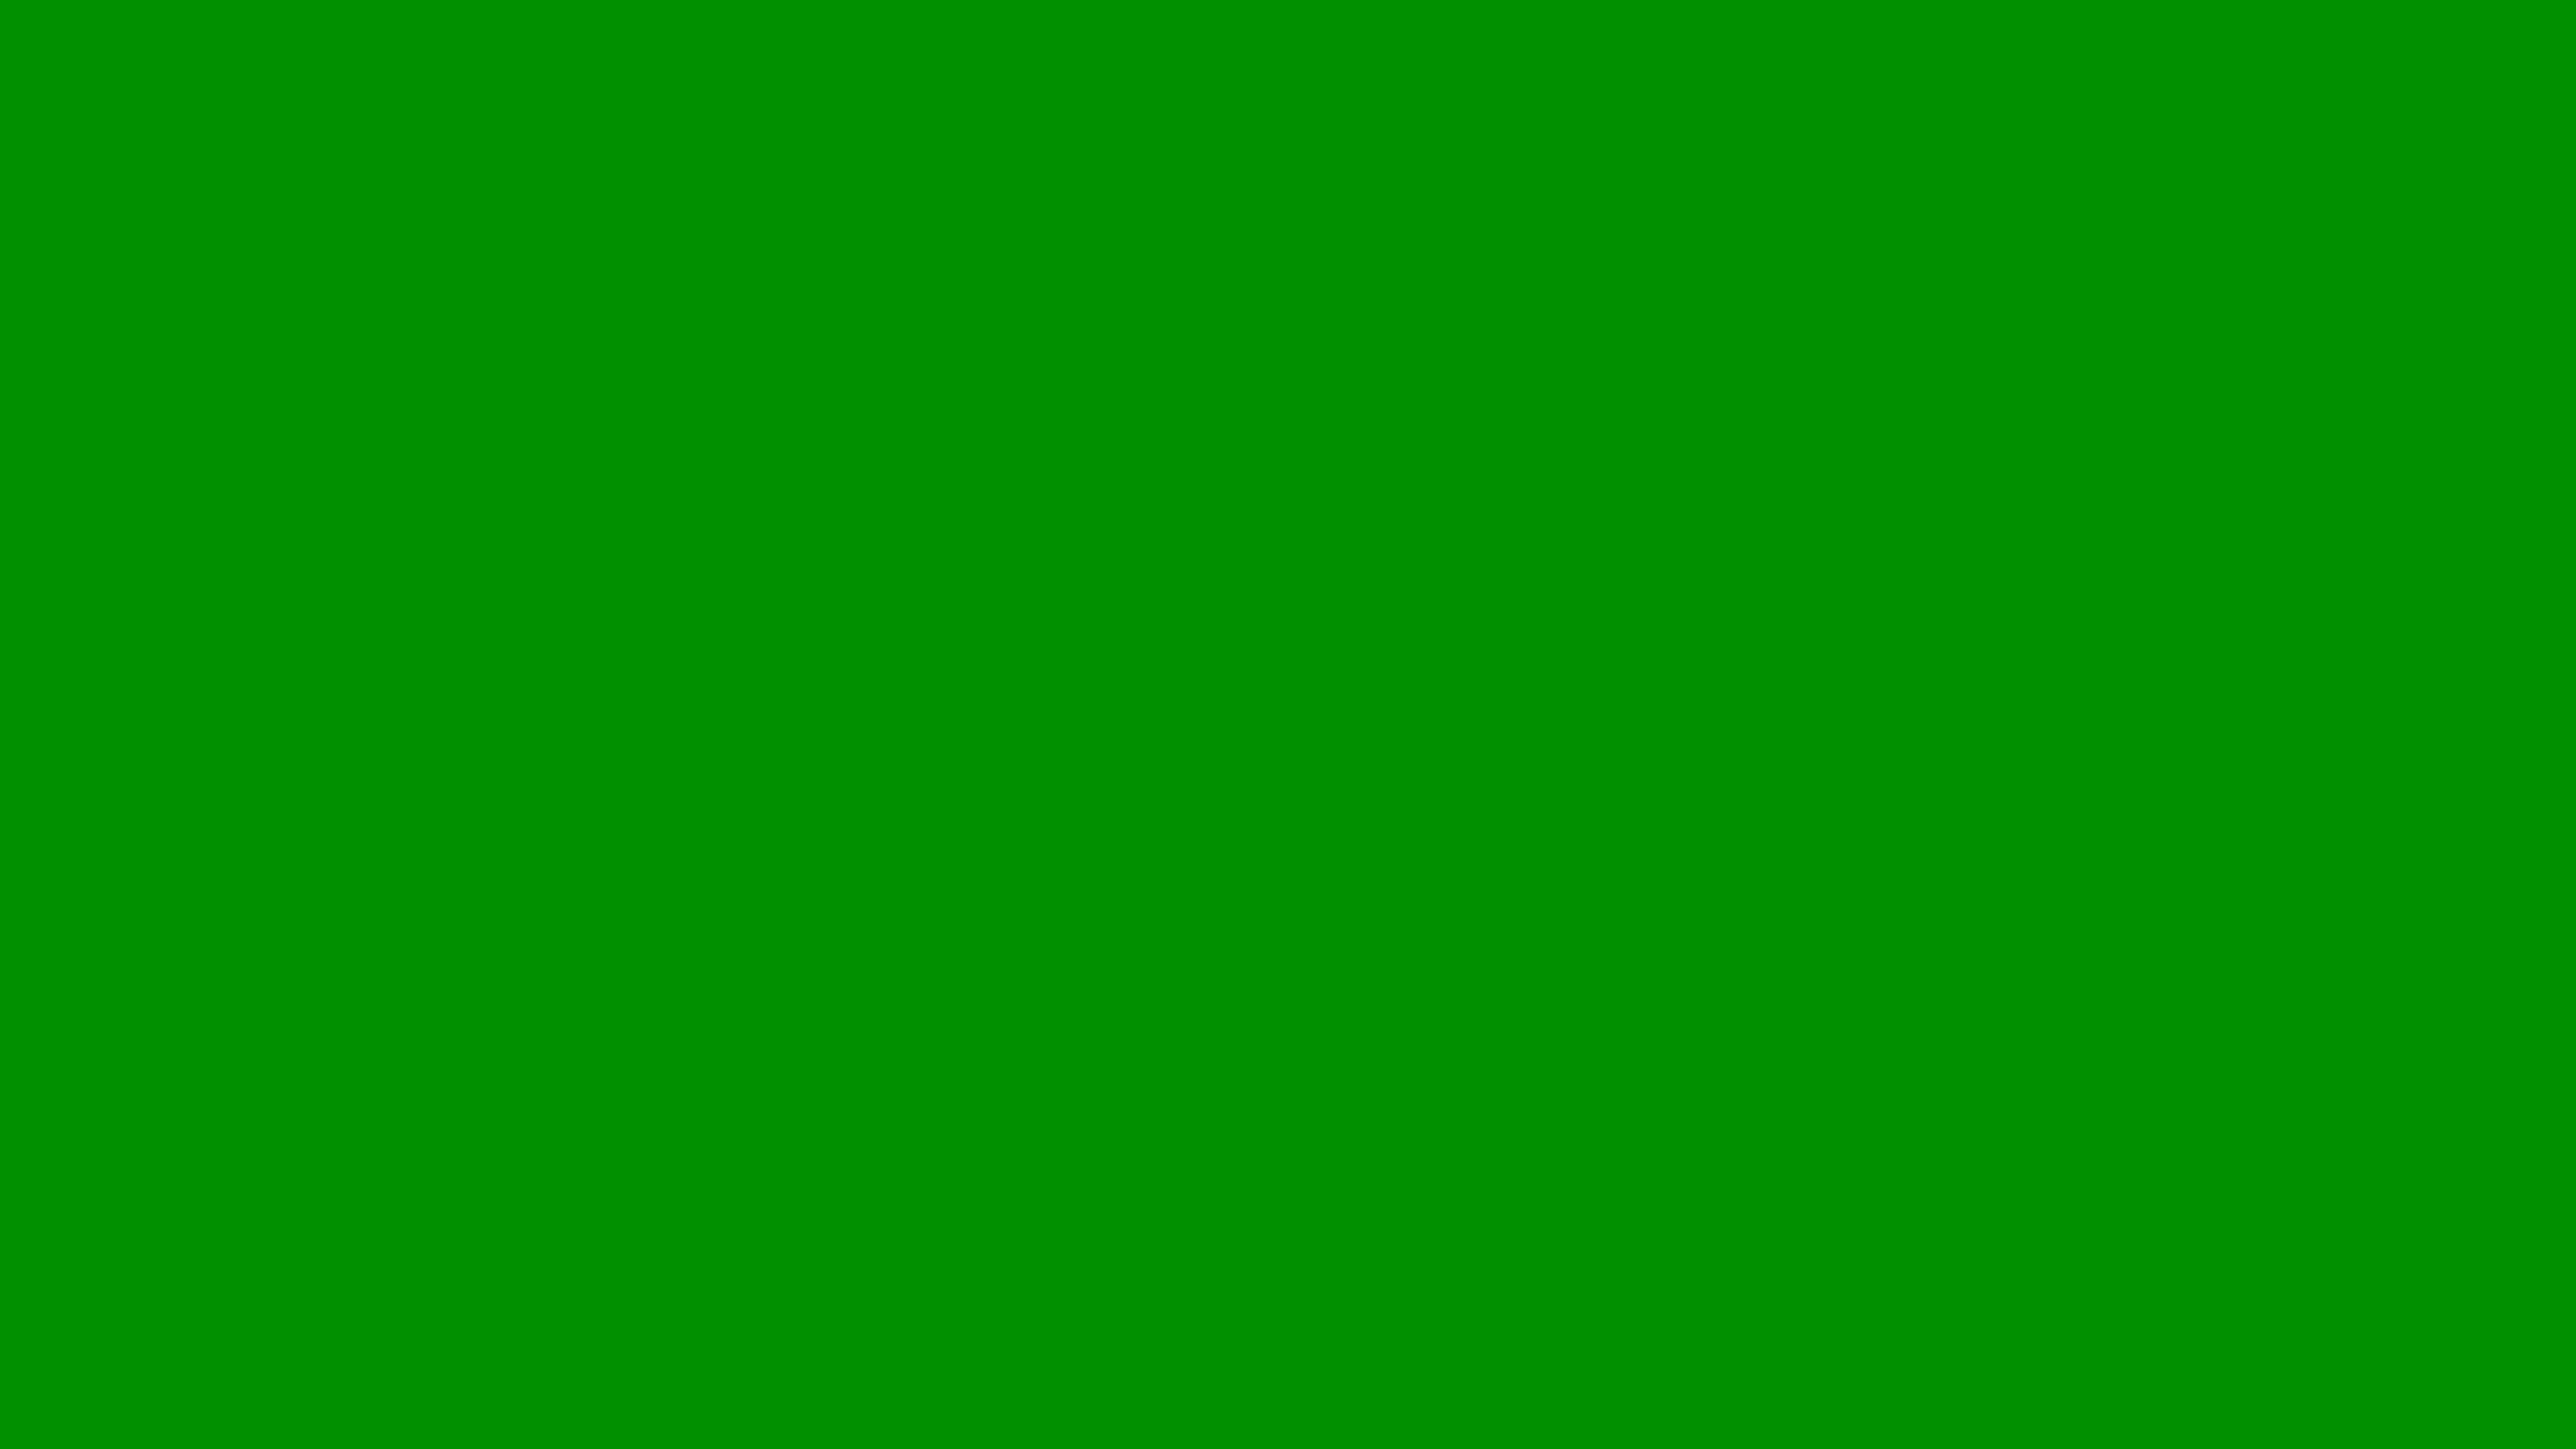 7680x4320 Islamic Green Solid Color Background